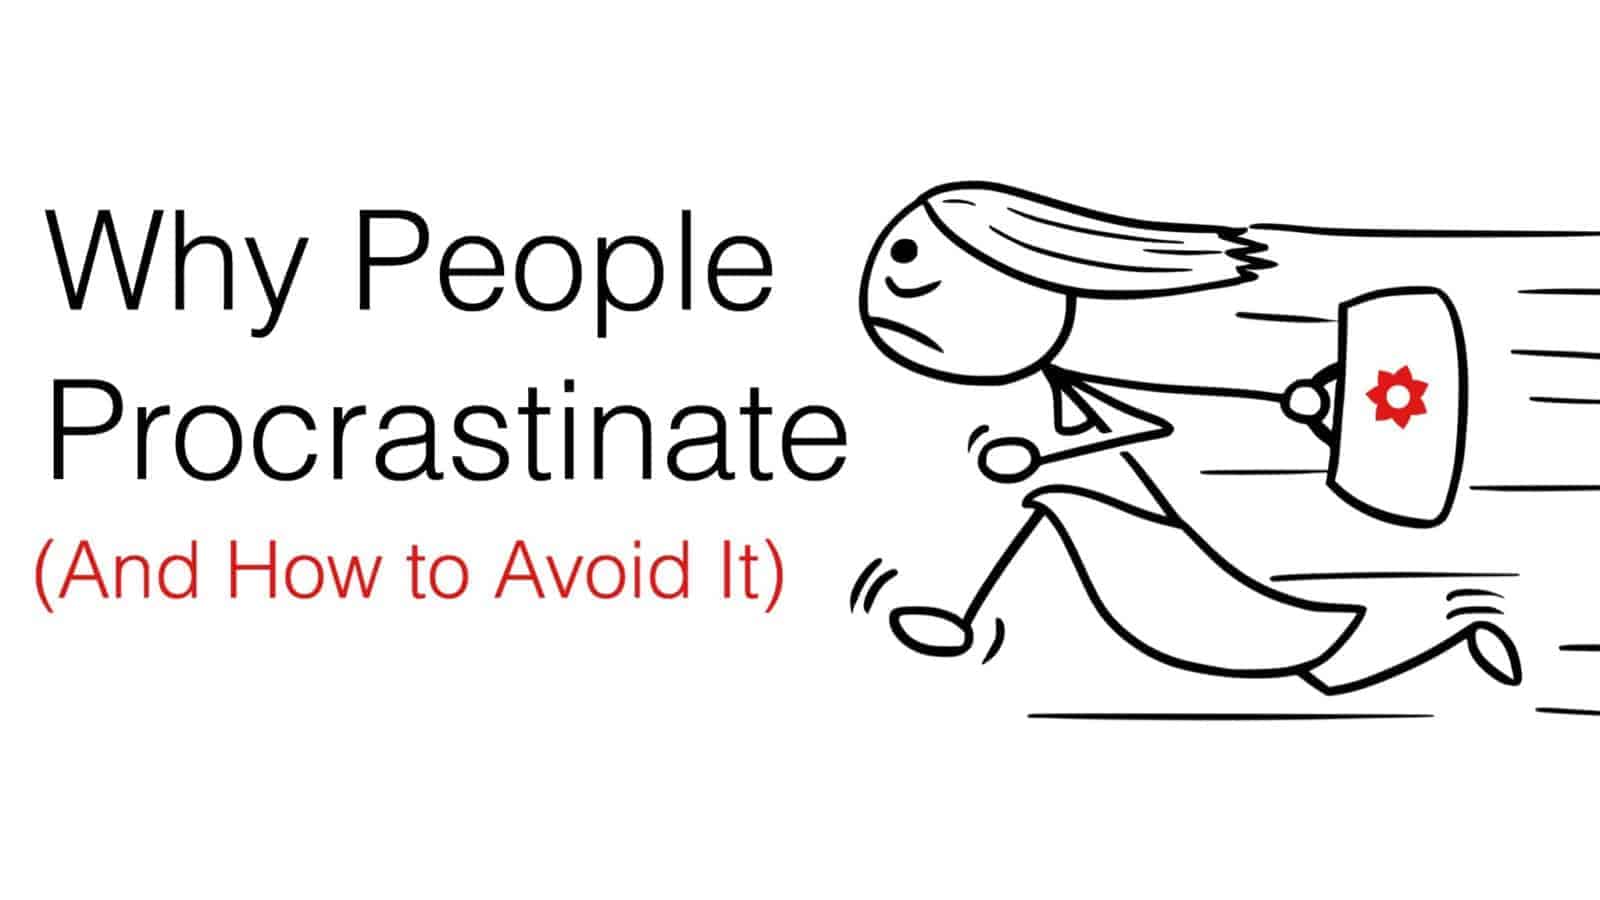 4 Reasons People Procrastinate (And How to Avoid It)